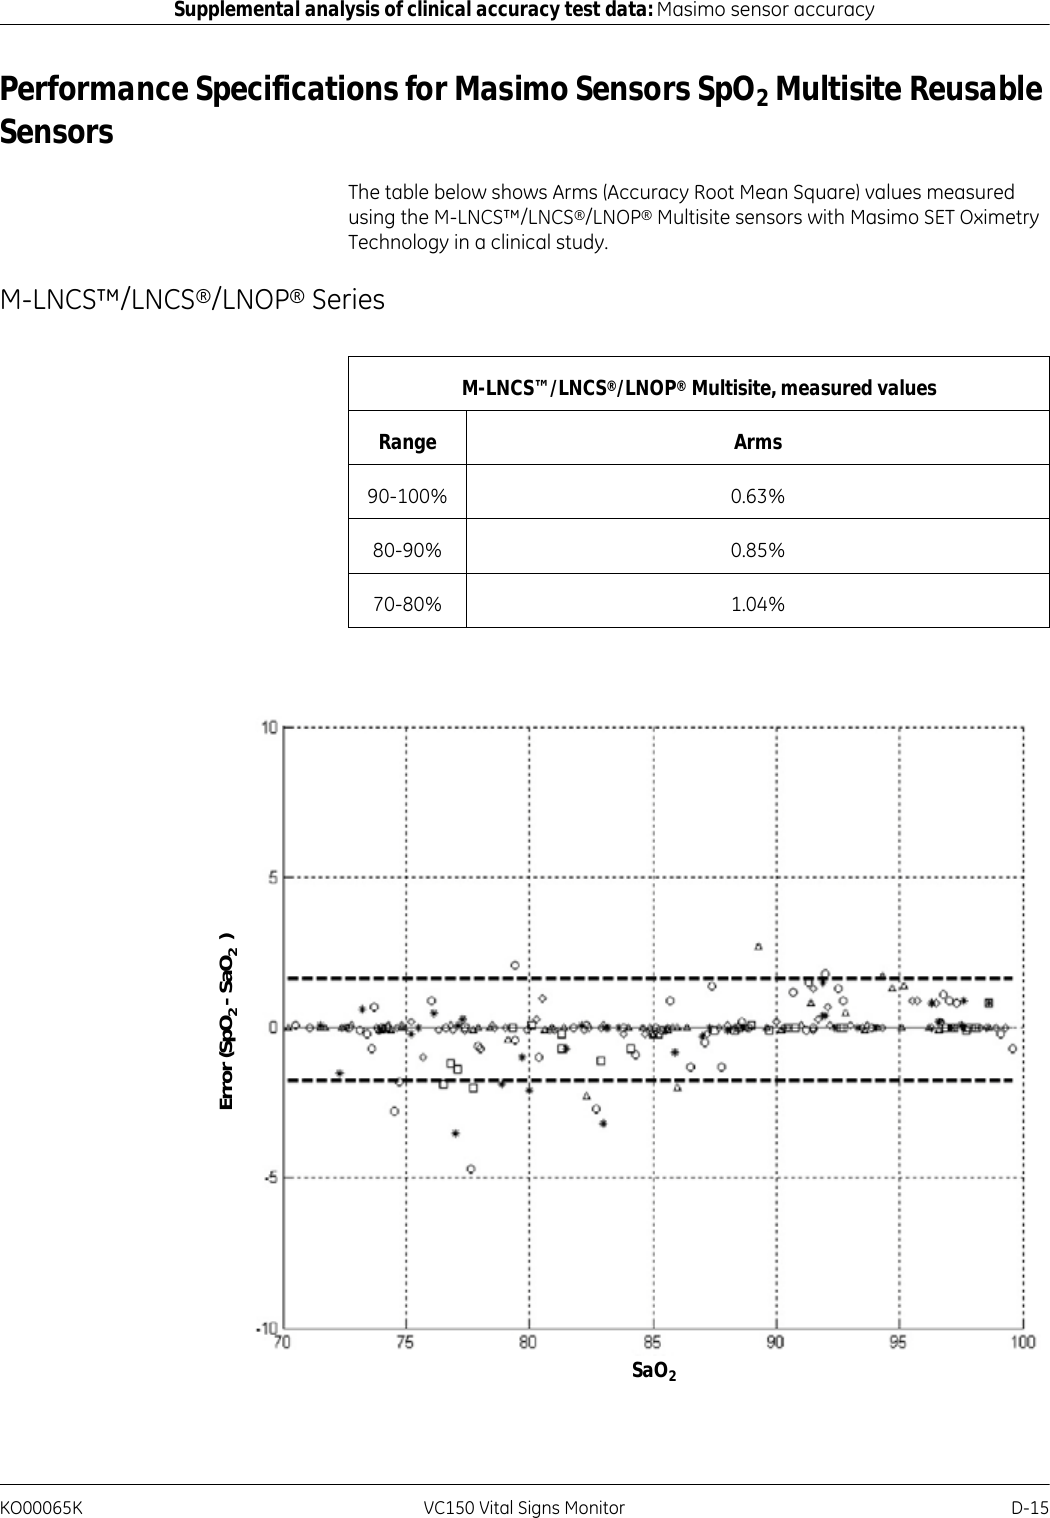 KO00065K VC150 Vital Signs Monitor D-15Supplemental analysis of clinical accuracy test data: Masimo sensor accuracyPerformance Specifications for Masimo Sensors SpO2 Multisite Reusable SensorsThe table below shows Arms (Accuracy Root Mean Square) values measured using the M-LNCS™/LNCS®/LNOP® Multisite sensors with Masimo SET Oximetry Technology in a clinical study.M-LNCS™/LNCS®/LNOP® SeriesM-LNCS™/LNCS®/LNOP® Multisite, measured valuesRange Arms90-100% 0.63%80-90% 0.85%70-80% 1.04%SaO2Error (SpO2 - SaO2  )